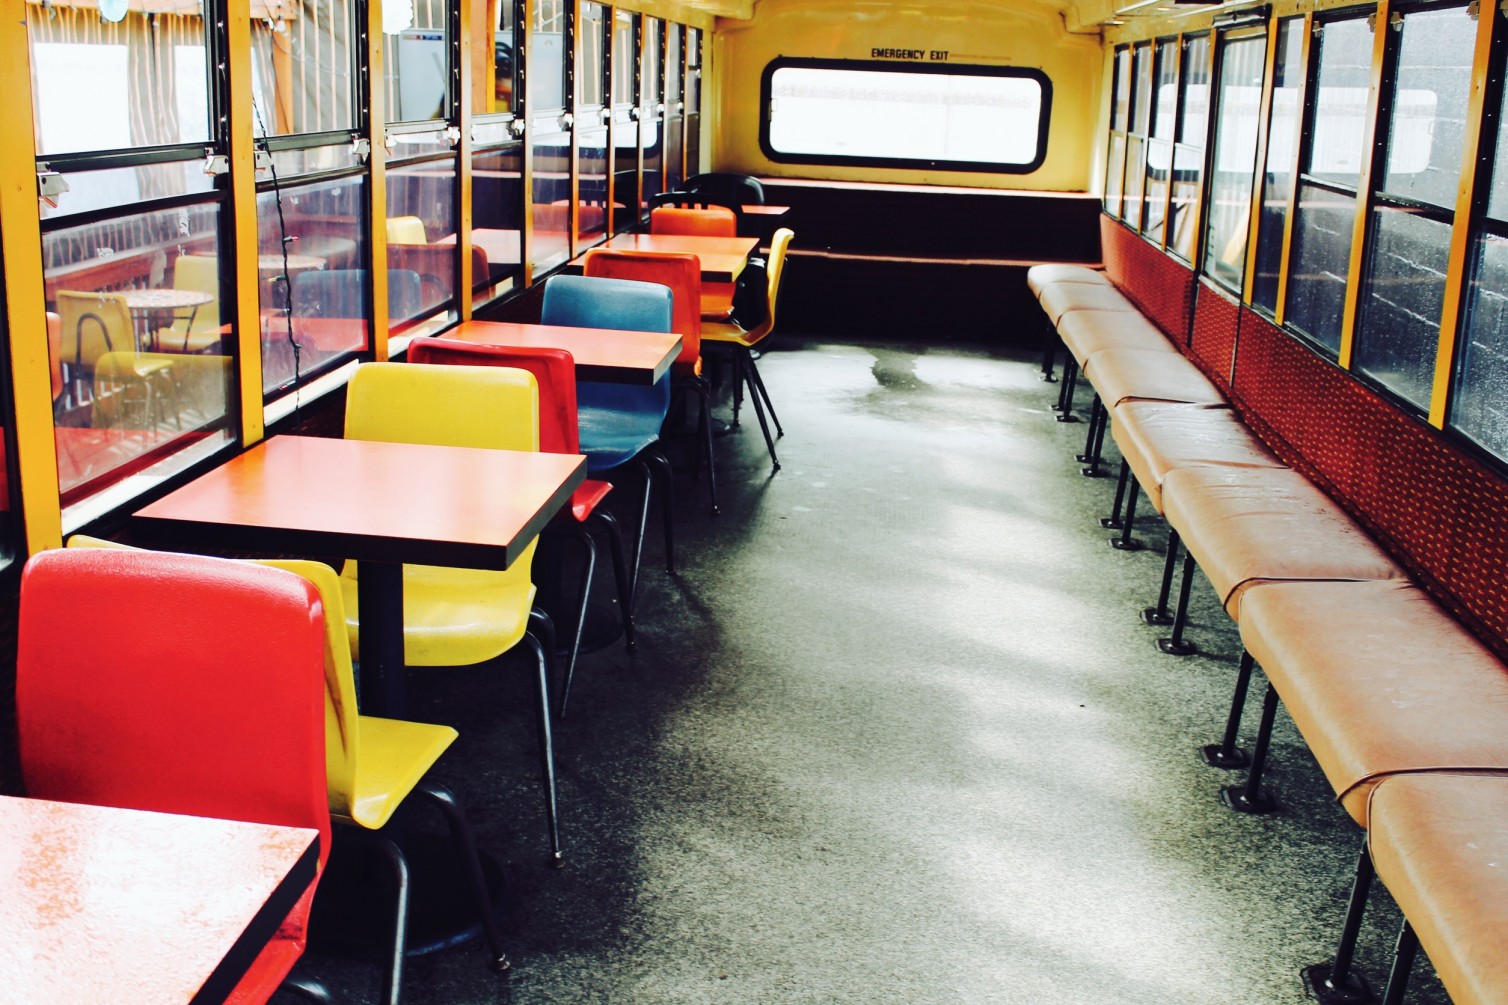 The interior of a school bus. The Passed Note accepts well-crafted fiction, poetry, nonfiction, and art for young adult readers.